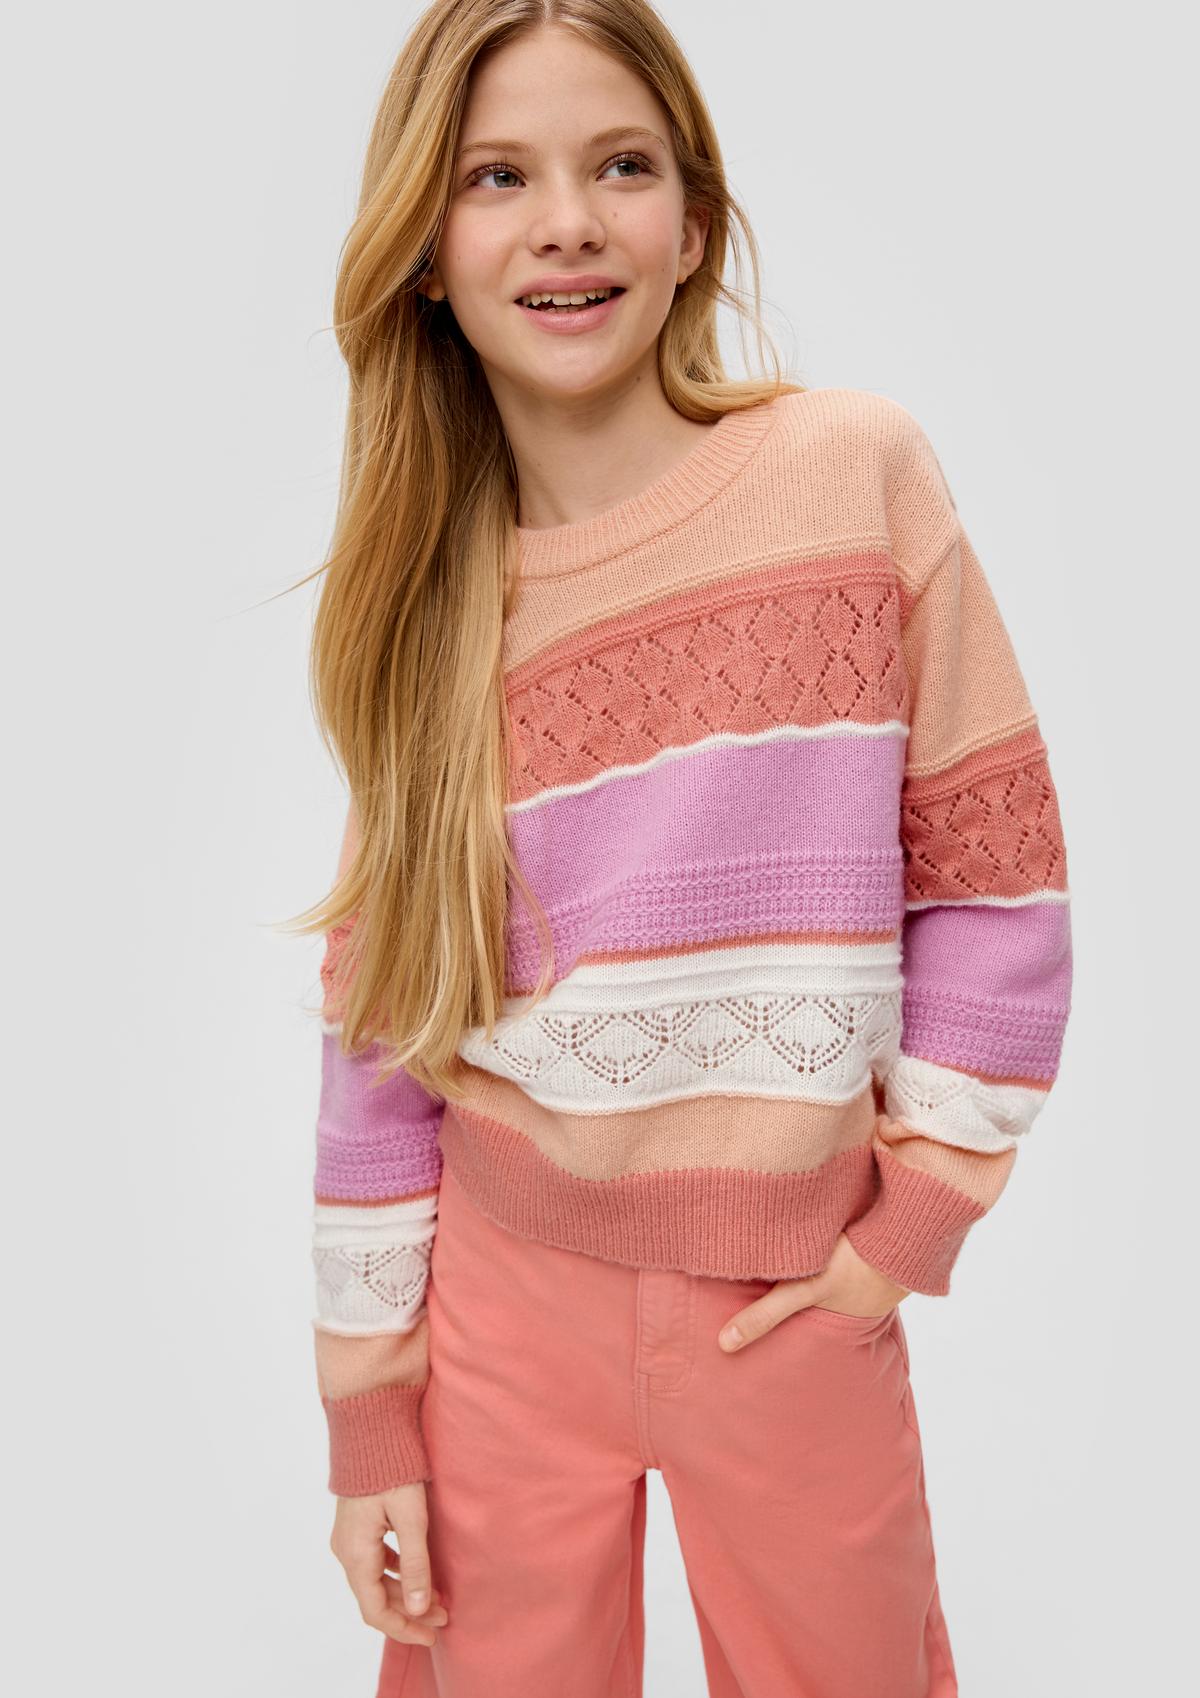 Knitted jumper with an openwork pattern